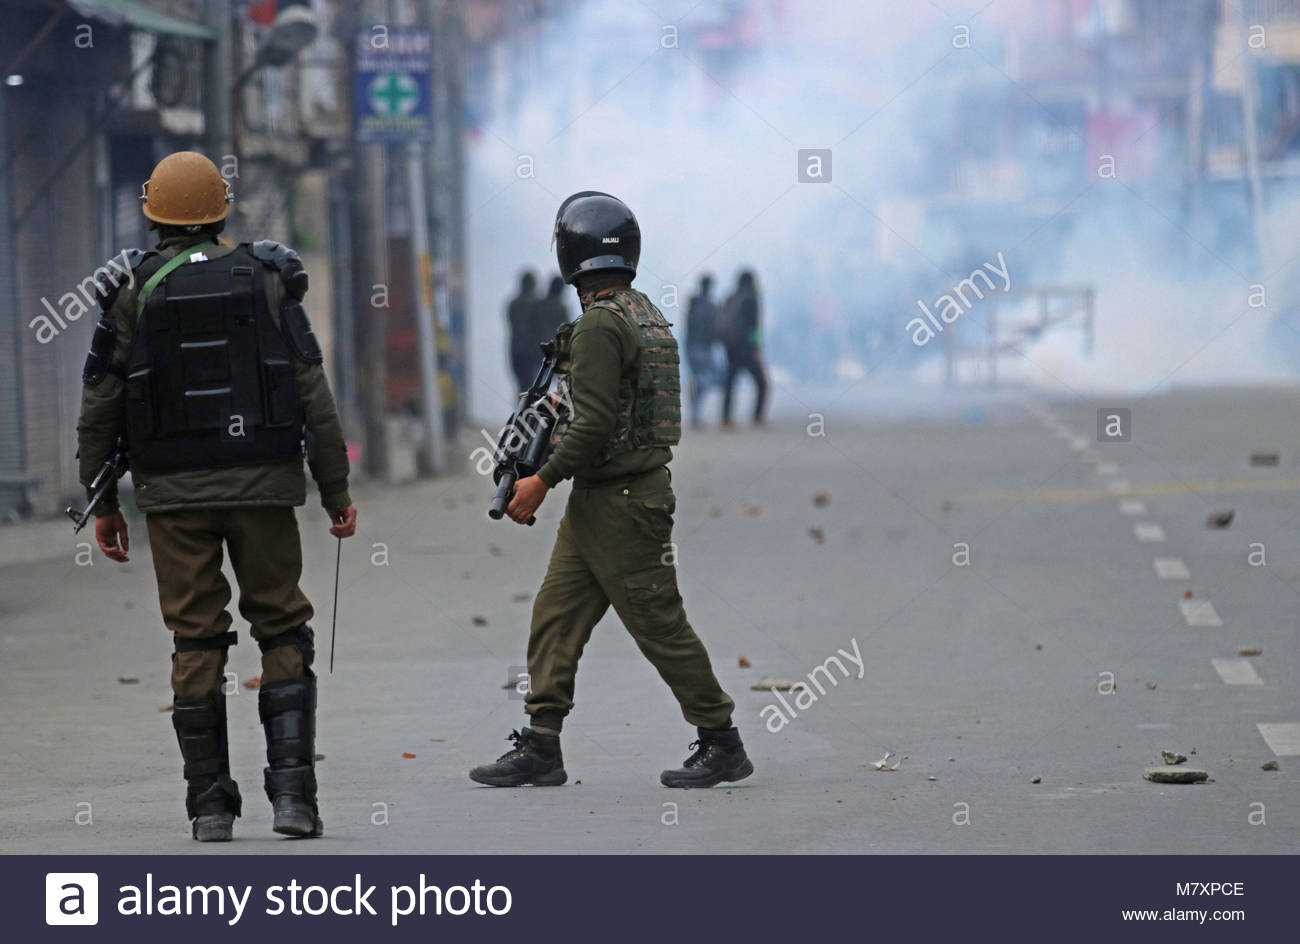 indian-policemen-moving-soon-as-clash-erupt-after-the-funeral-precession-M7XPCE.jpg